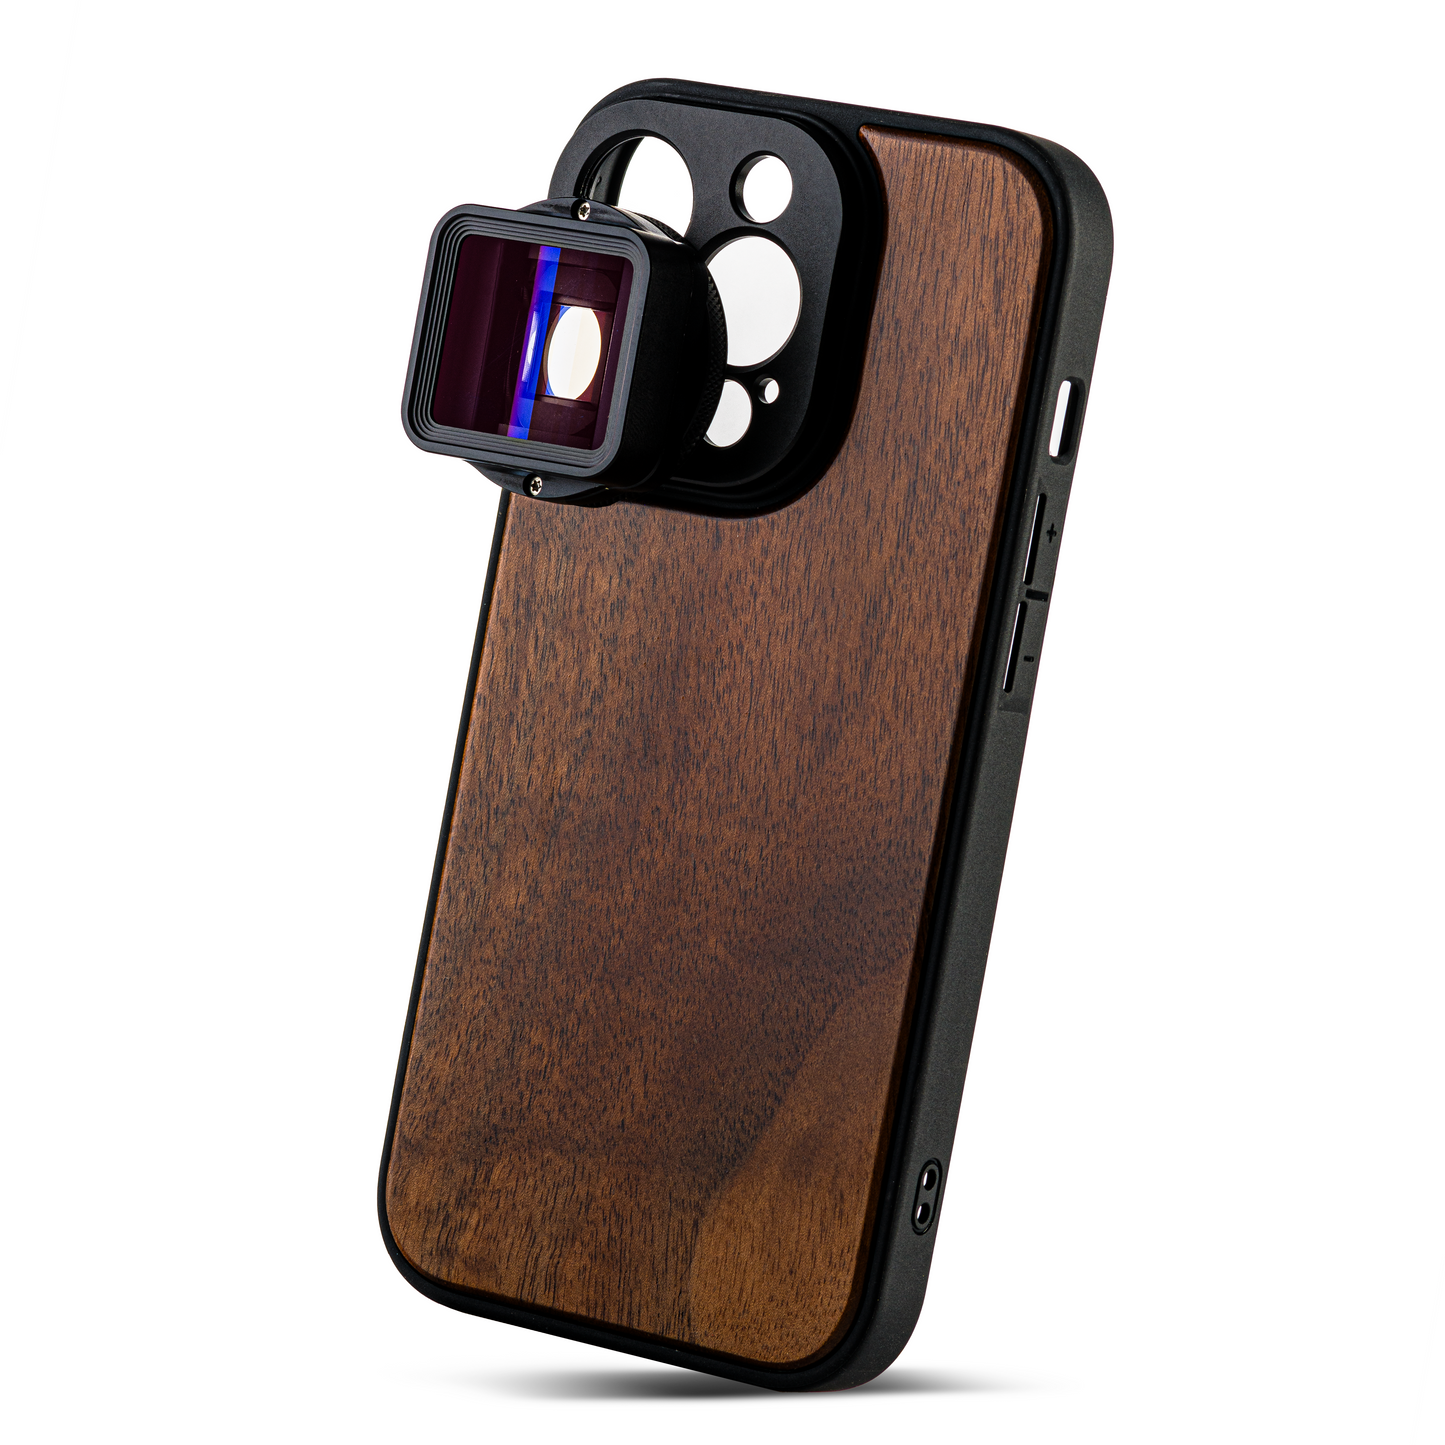 MOJOGEAR 17mm lens case for iPhone 13 and 14 - Real Wood